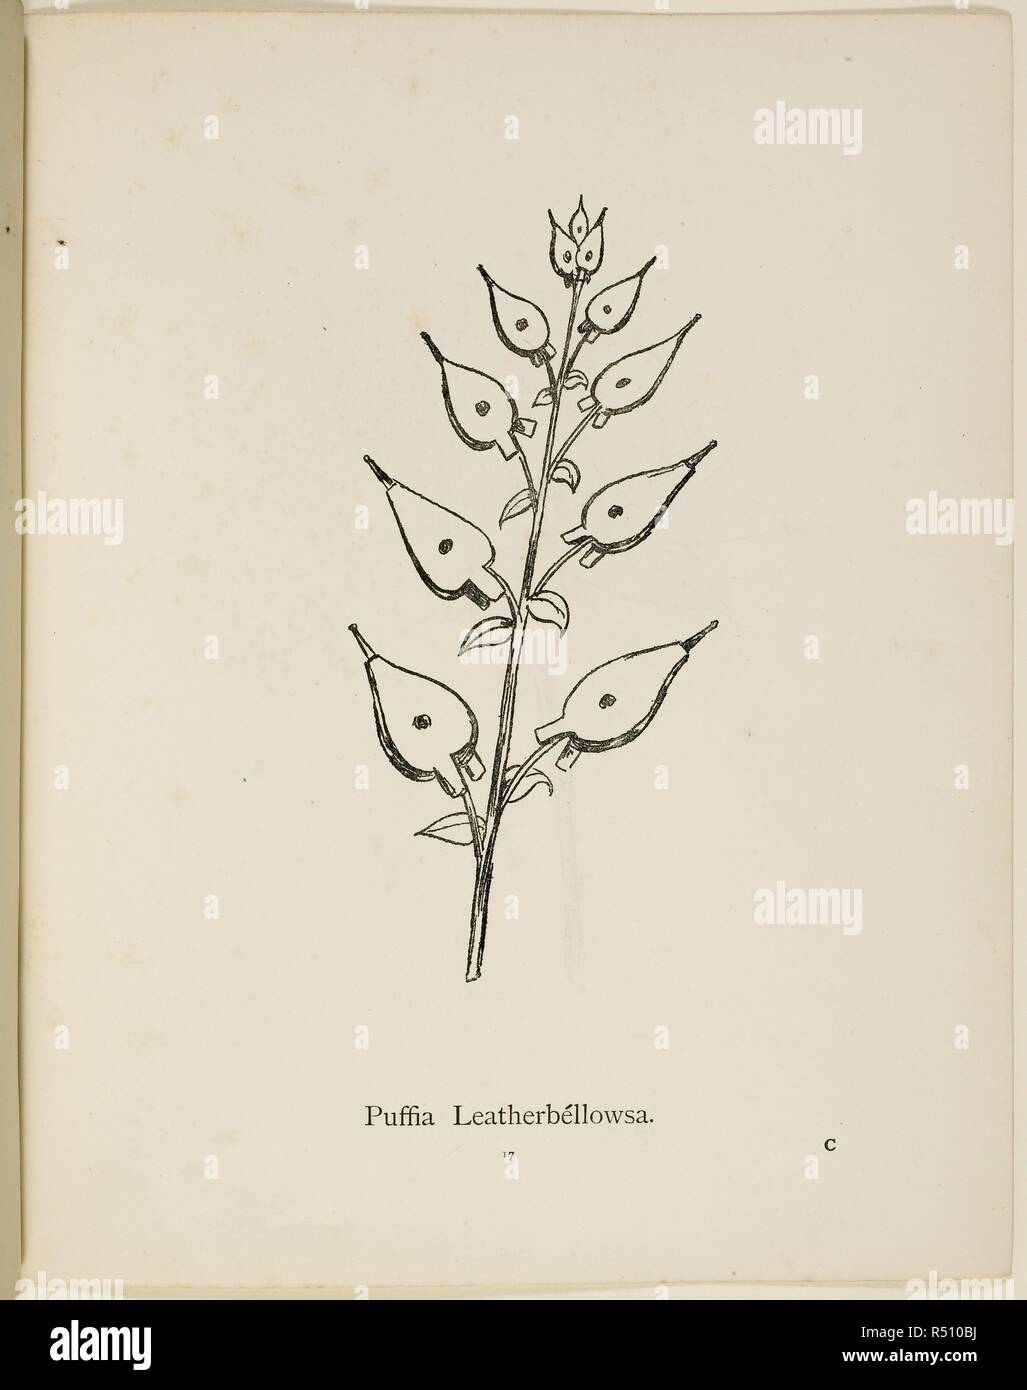 Fictional plant: 'Puffia Leatherbellowsa'  Illustration from Nonsense Botany by Edward Lear, published in 1889. . Nonsense Botany, and Nonsense Alphabets, Fifth edition. Frederick Warne & Co.: London & New York, 1889. Source: Cup.400.a.42 17. Language: English. Stock Photo